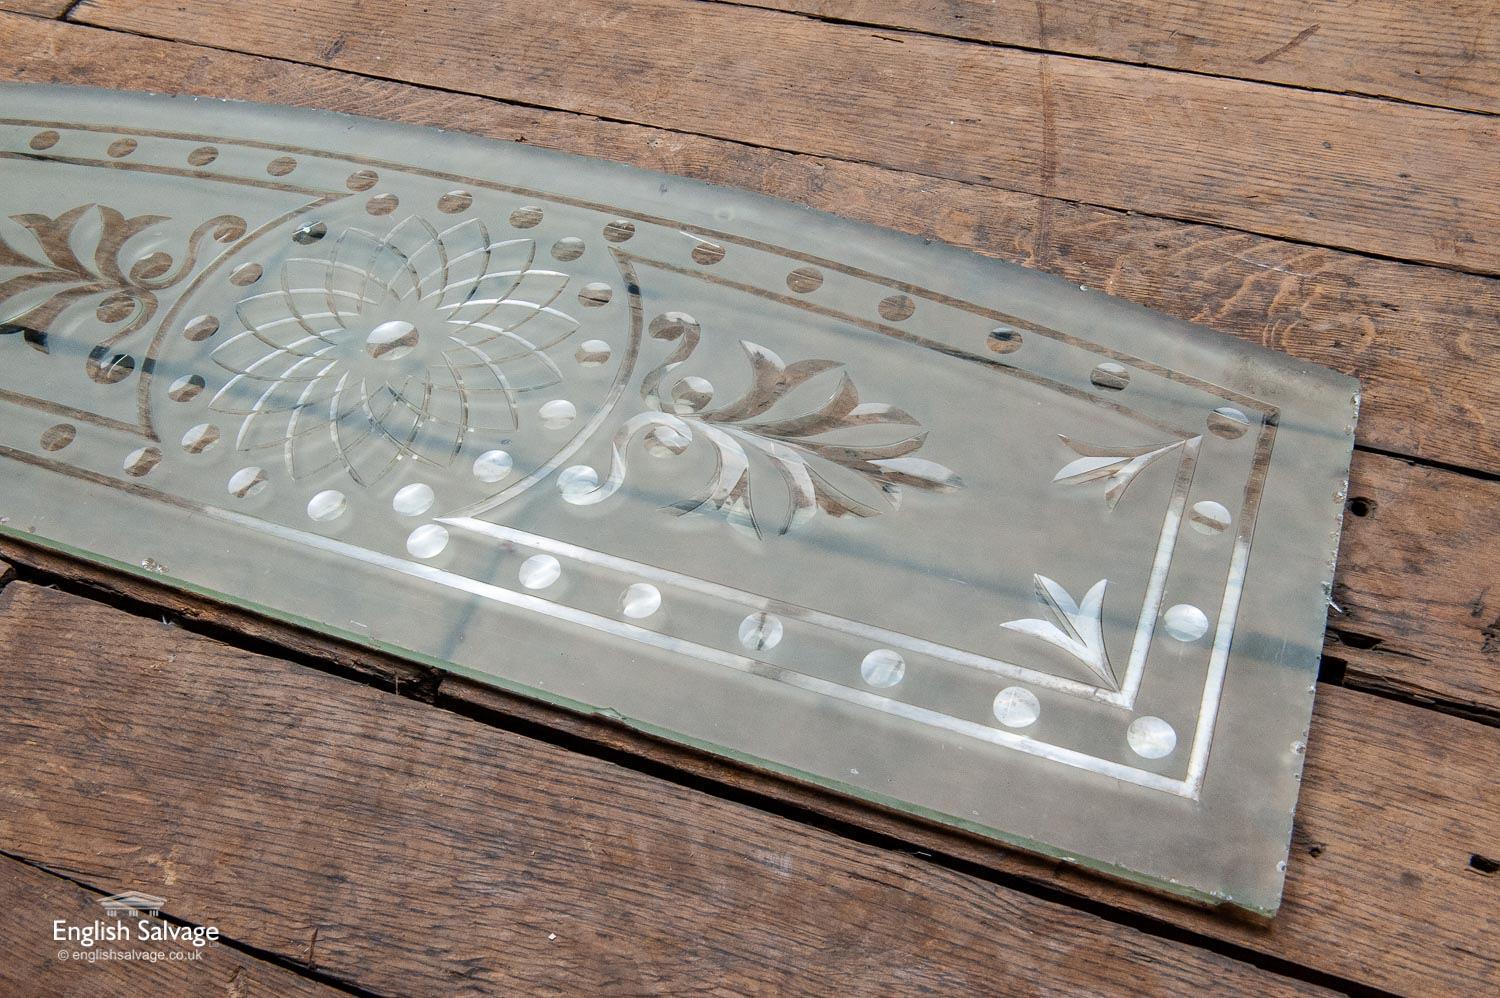 European Salvaged Etched Glass Panel with Arched Top, 20th Century For Sale